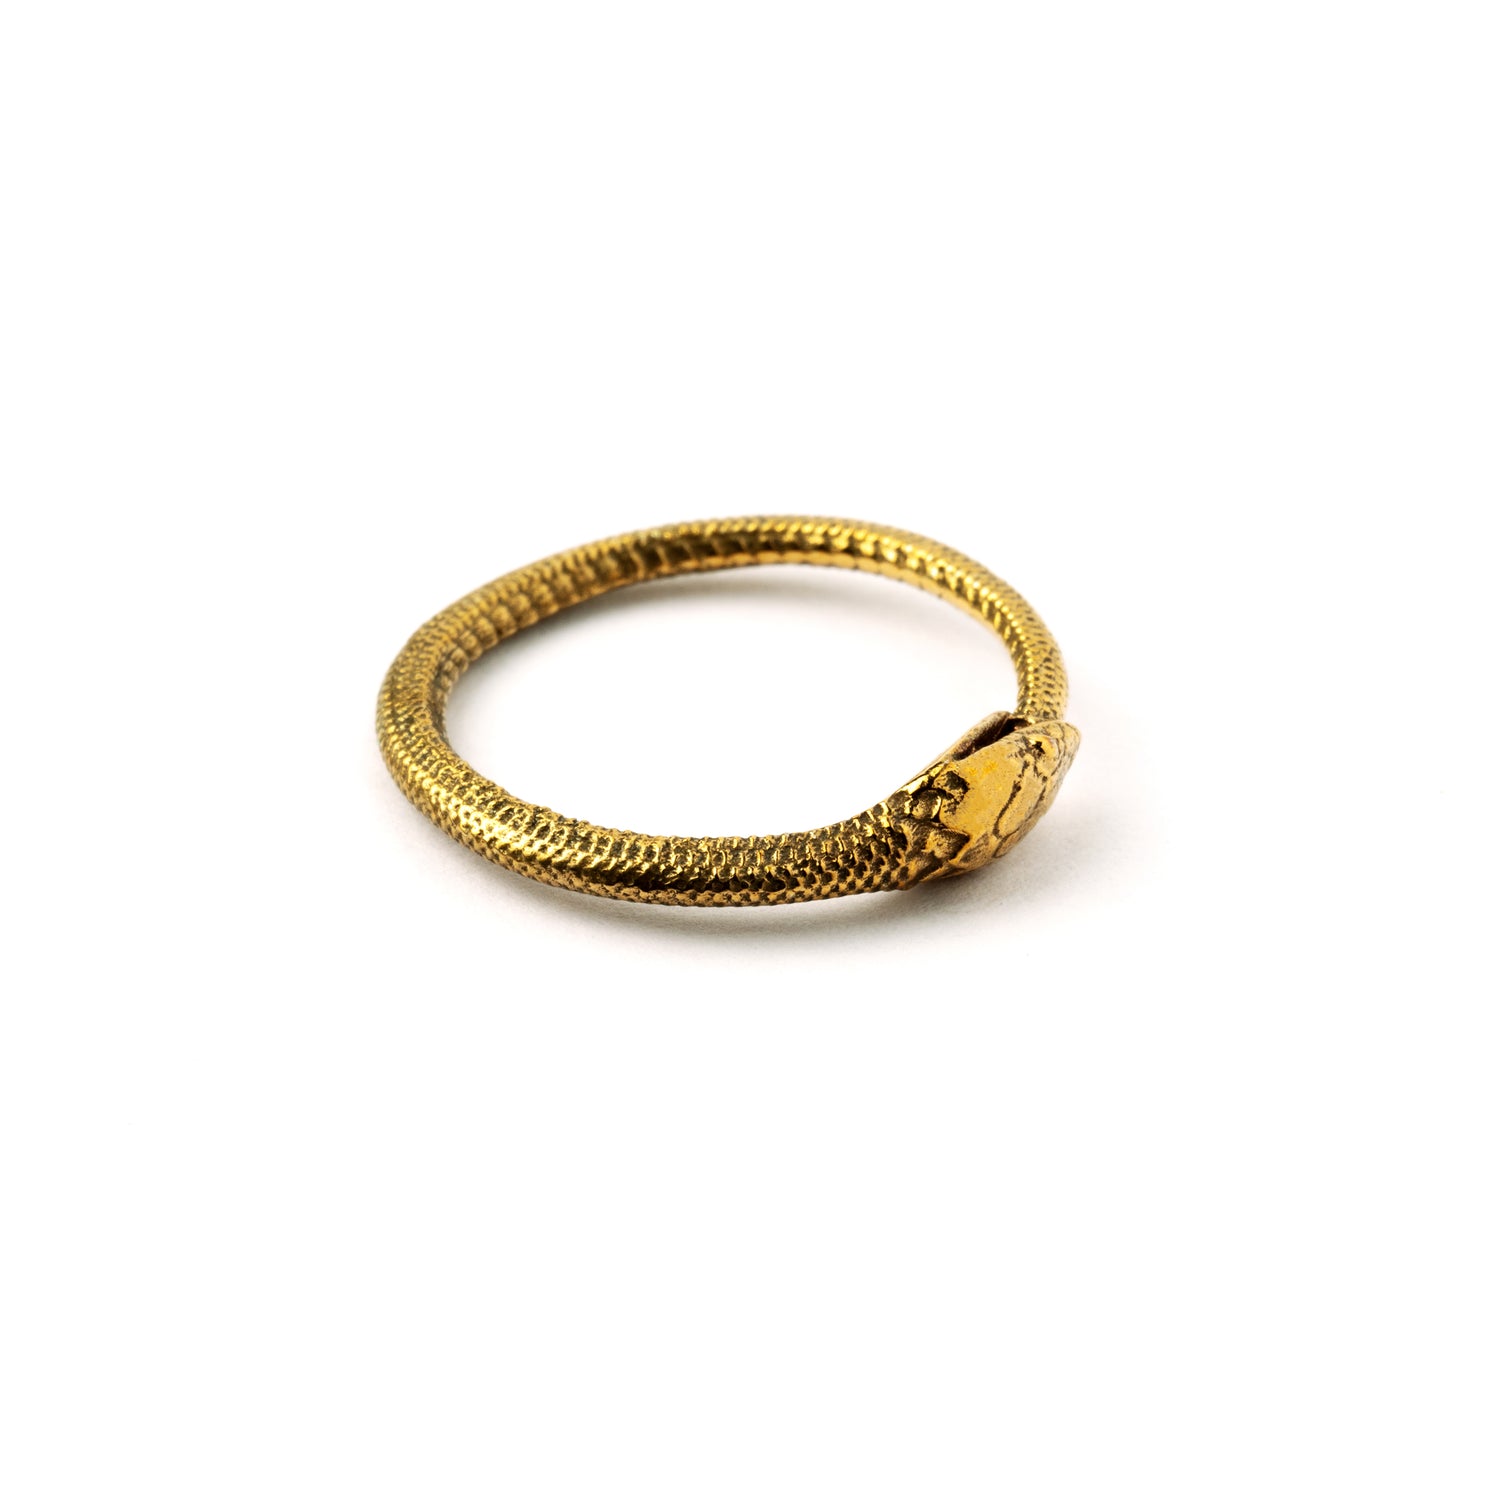 Bronze Ouroboros snake band ring right side view